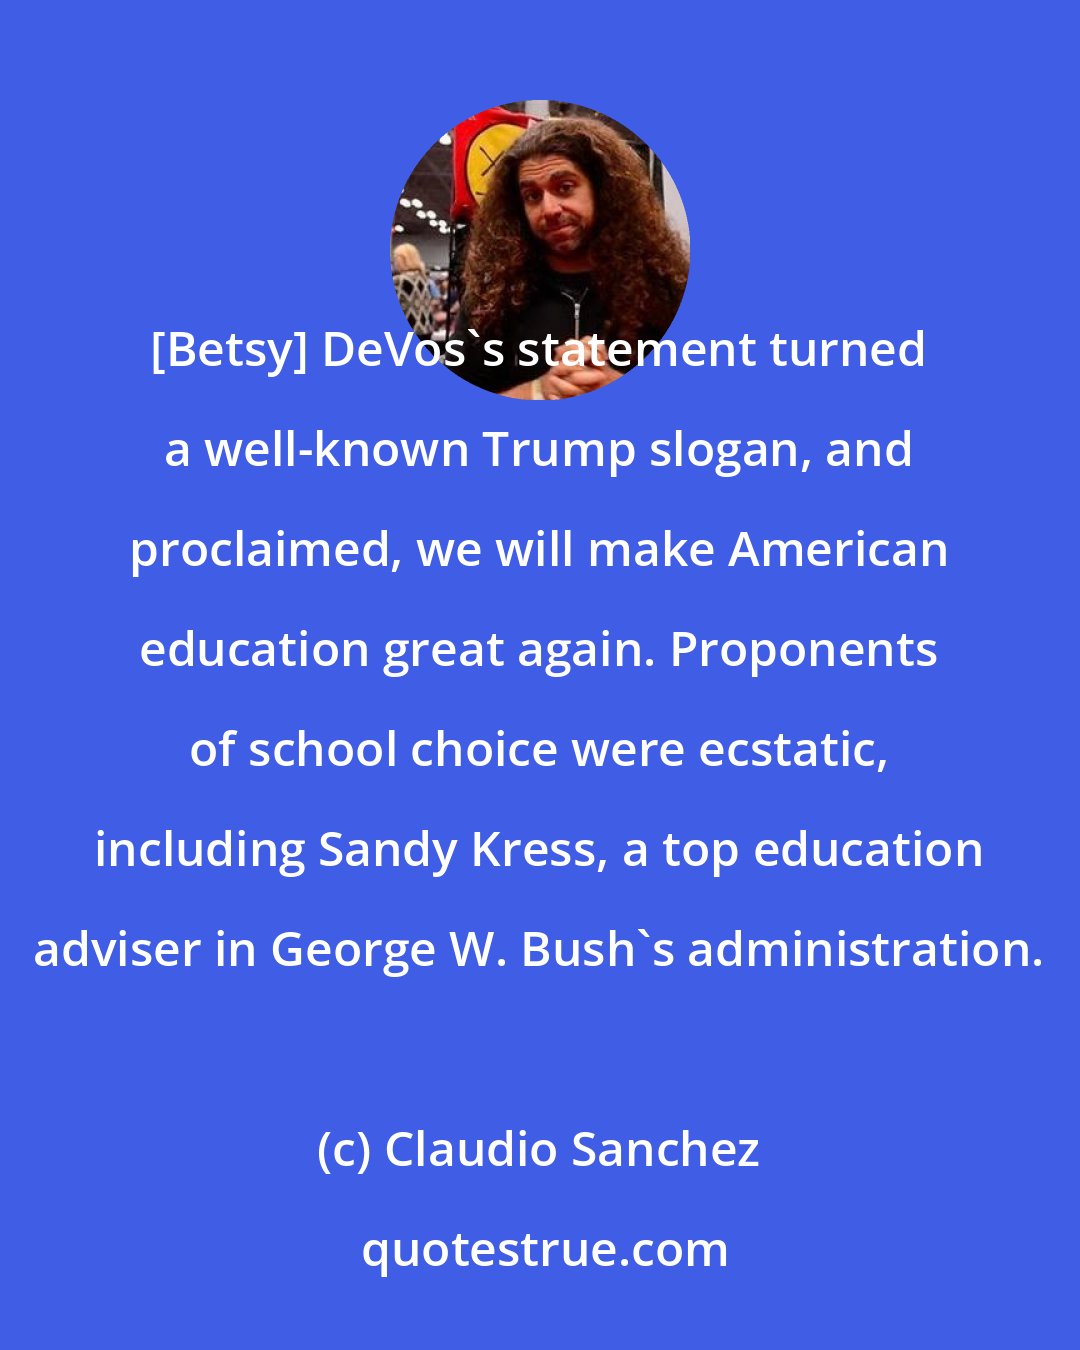 Claudio Sanchez: [Betsy] DeVos's statement turned a well-known Trump slogan, and proclaimed, we will make American education great again. Proponents of school choice were ecstatic, including Sandy Kress, a top education adviser in George W. Bush's administration.